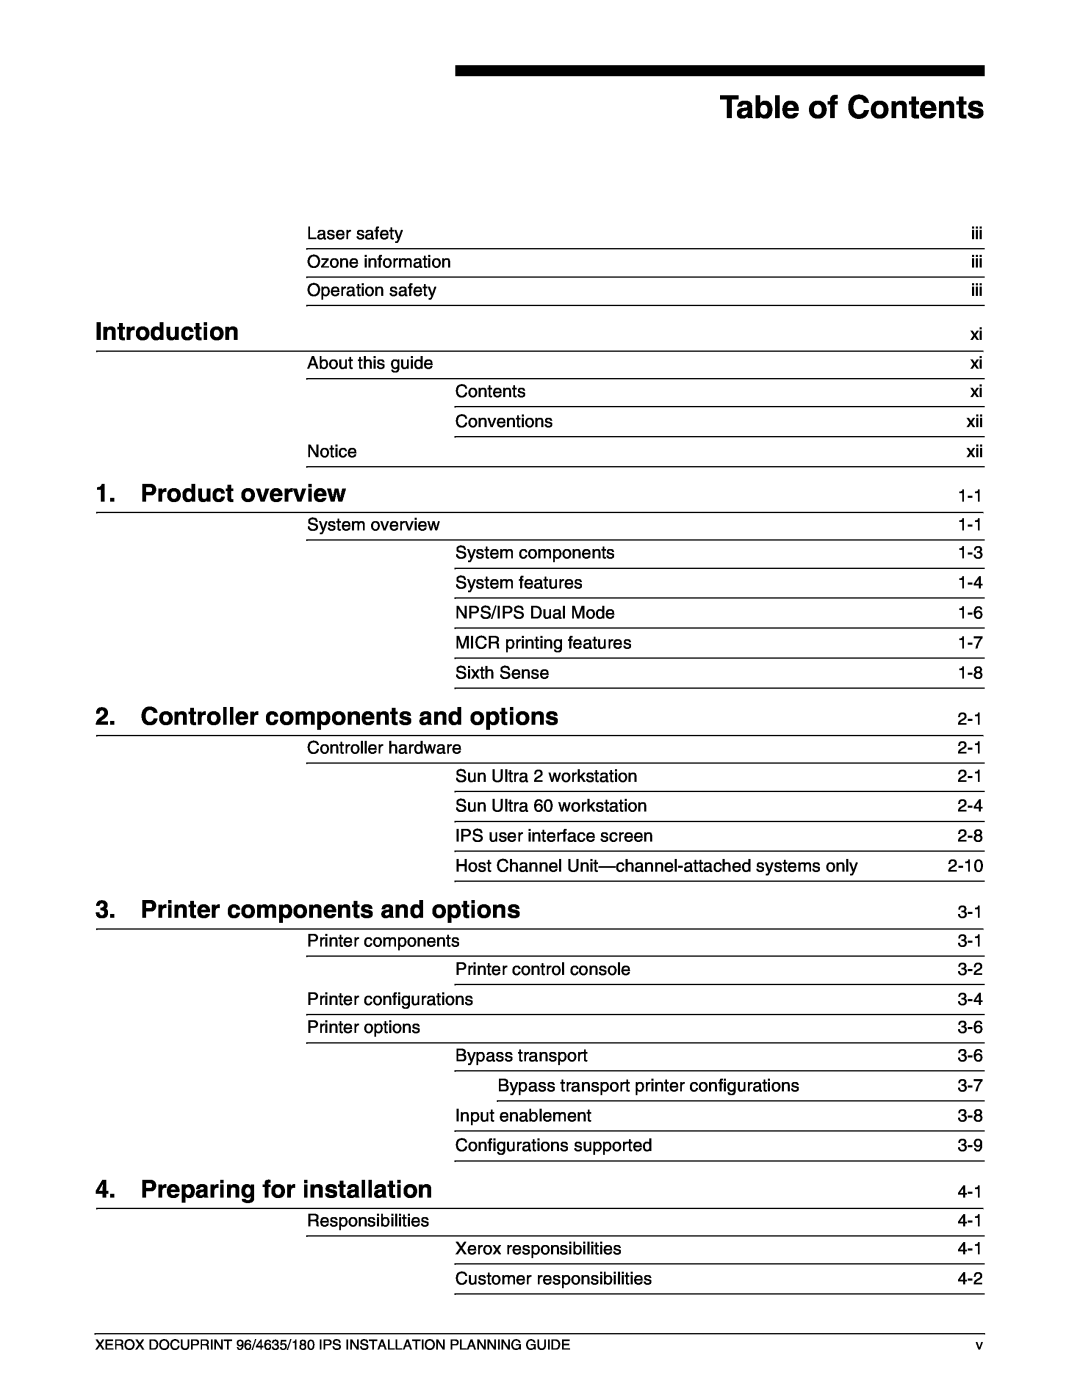 Xerox 180 IPS manual Table of Contents, Introduction, Product overview, Controller components and options 